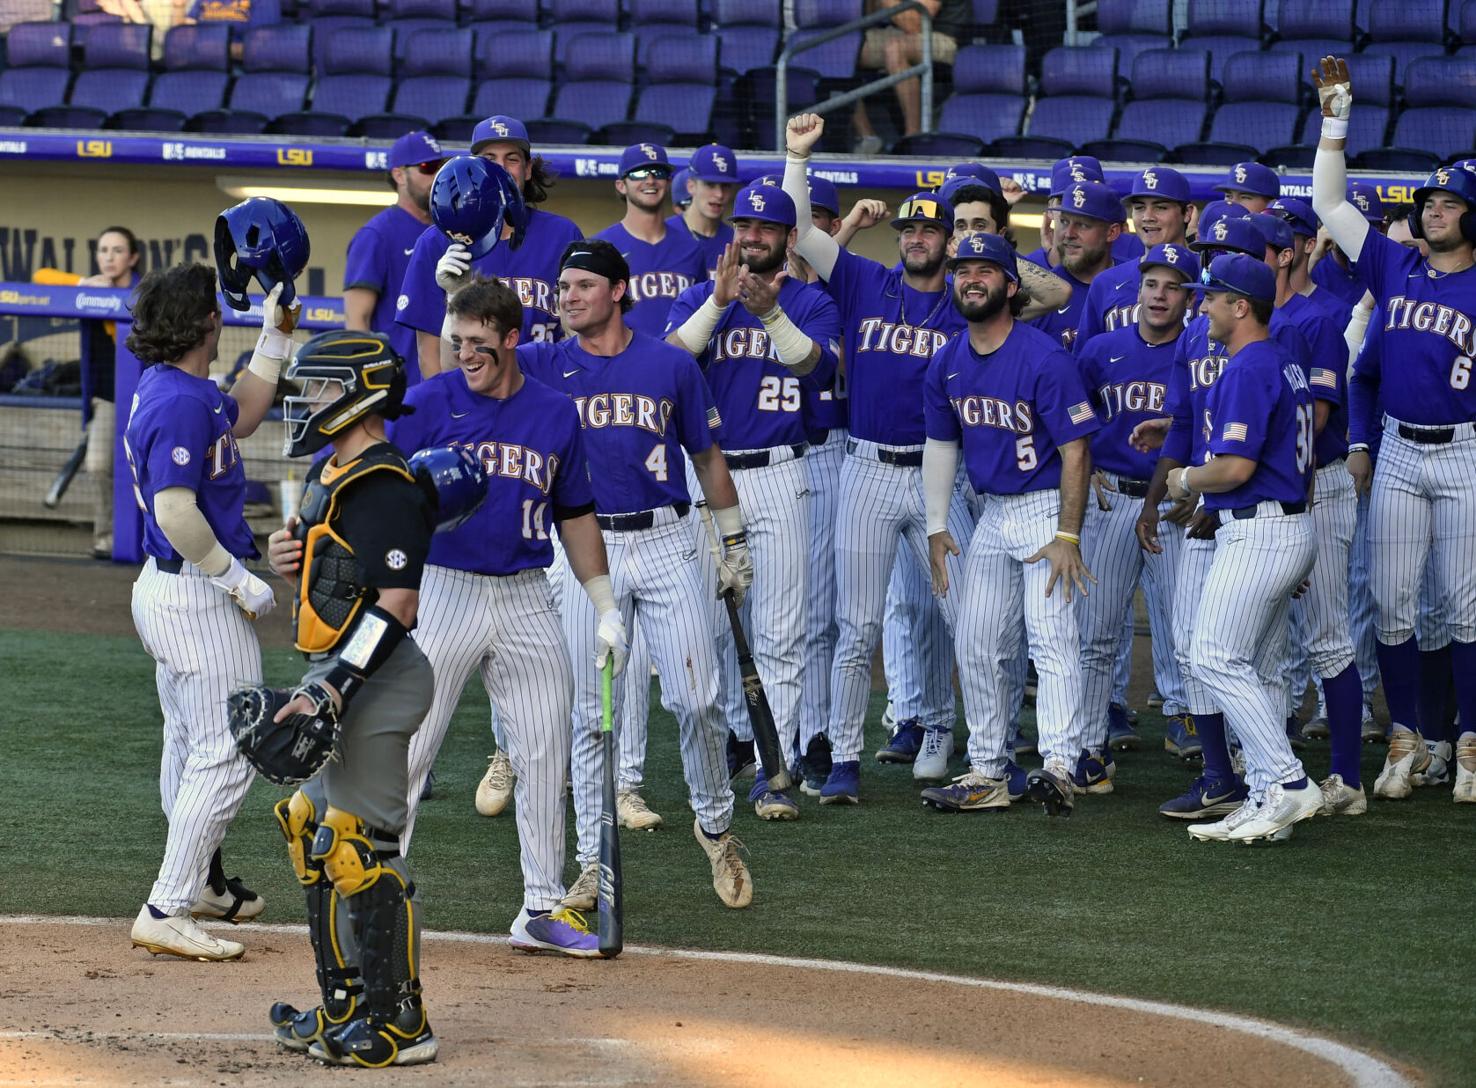 Who will the LSU baseball team play in 2023? The answers were released